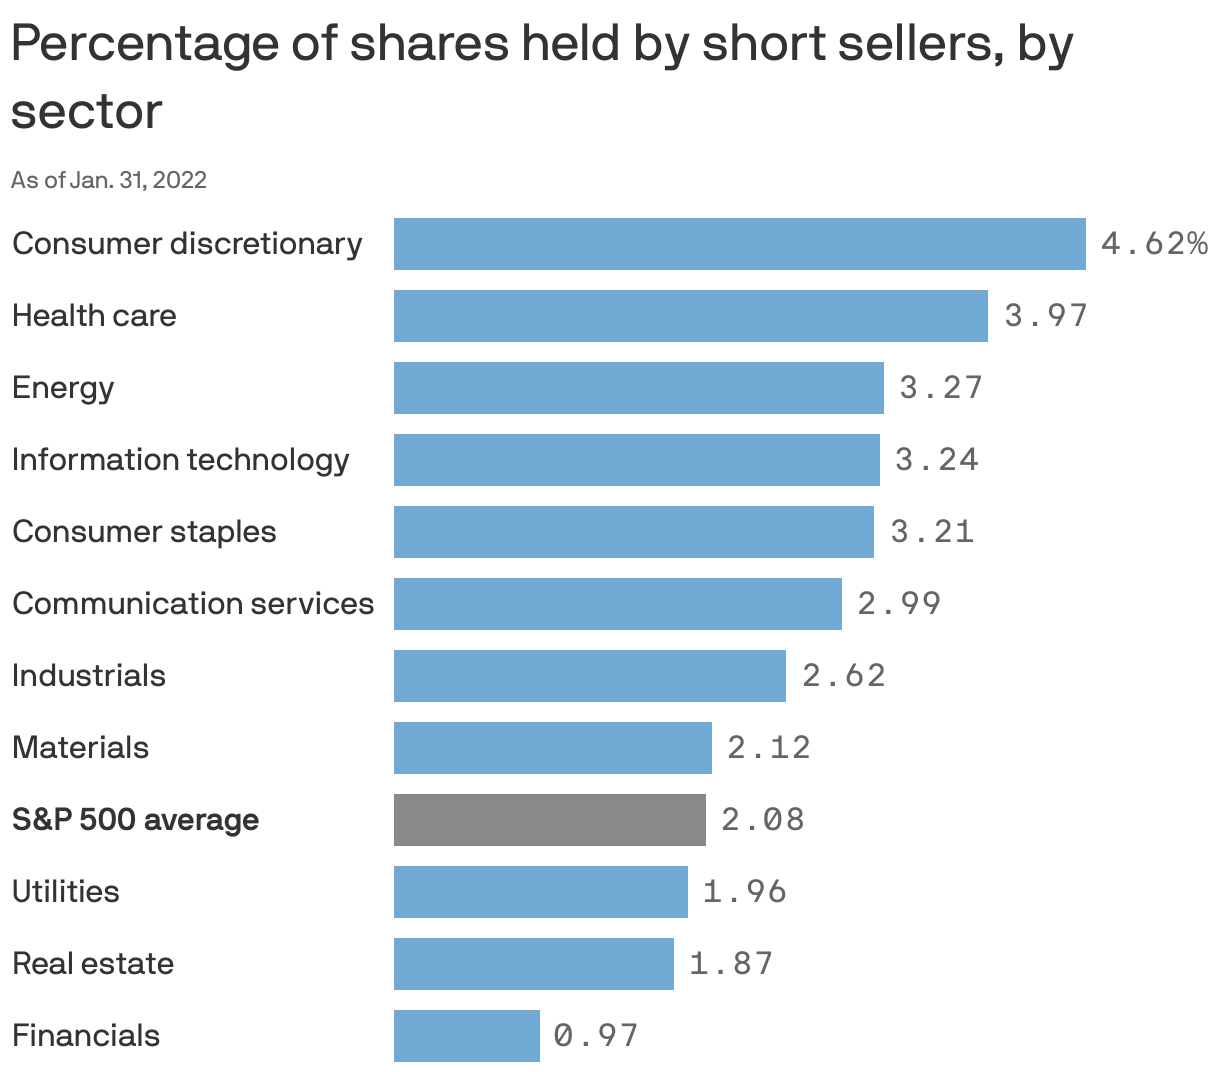 Percentage of shares held by short sellers, by sector